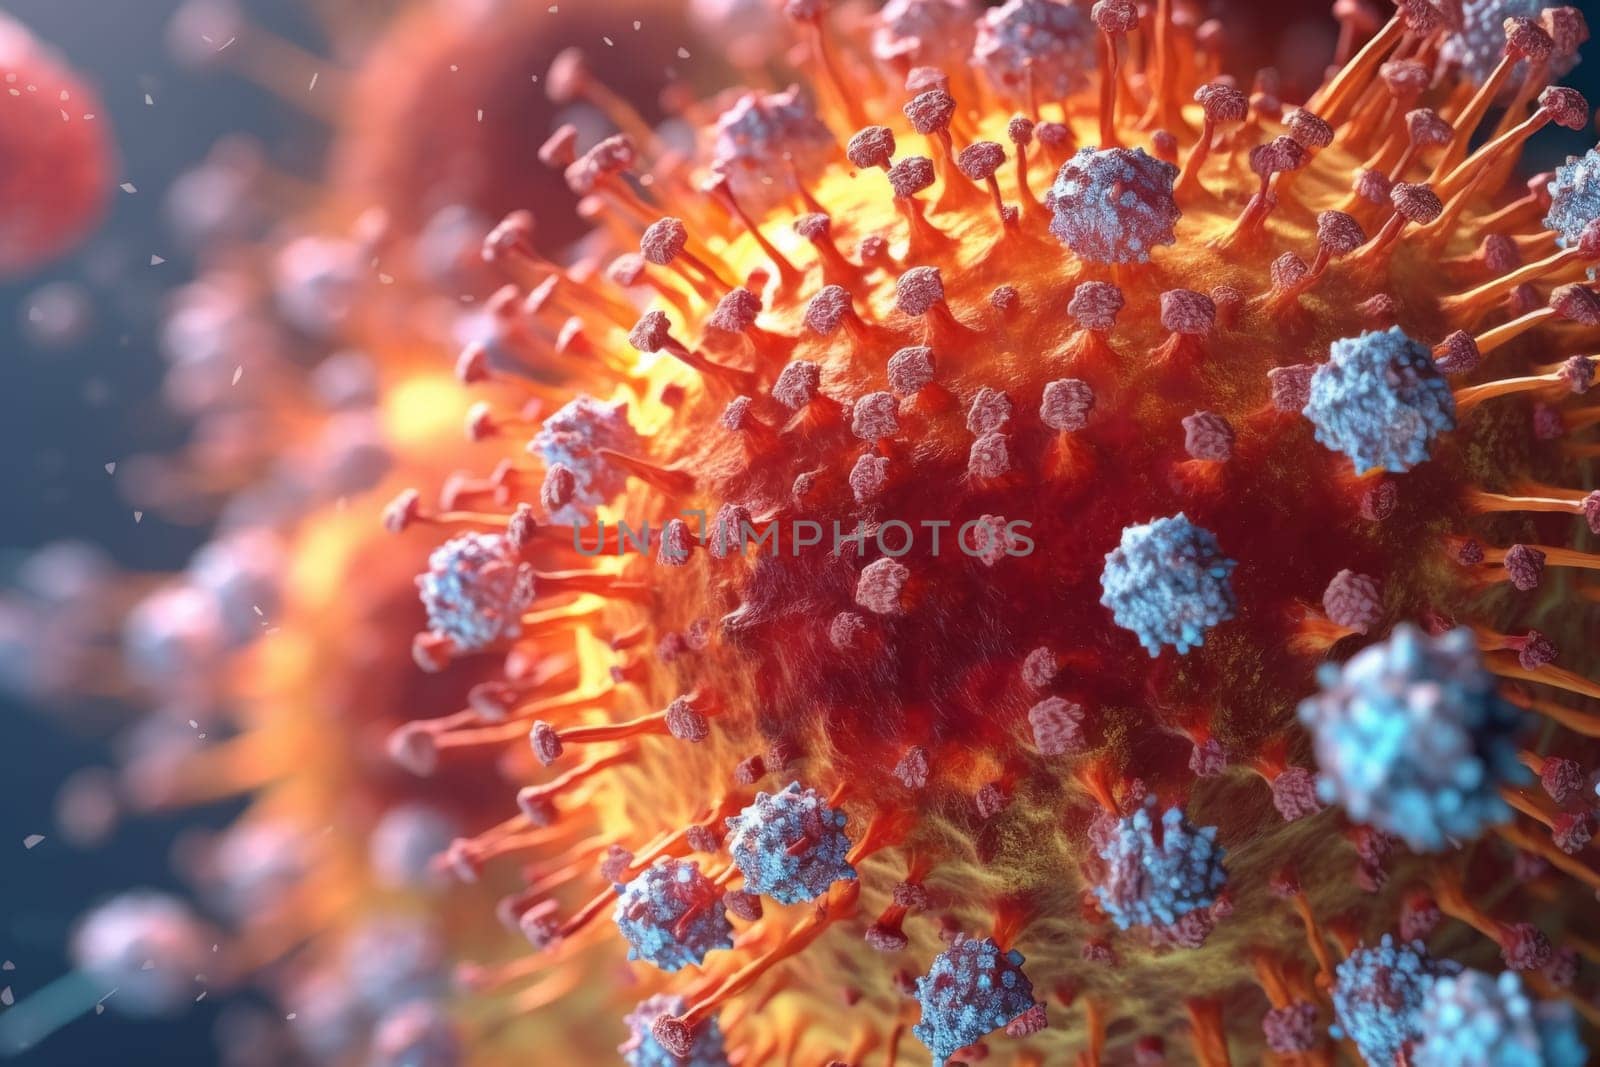 This enhanced close-up image showcases a highly detailed microscopic view of a virus with prominent spike proteins, emphasizing the subject's scientific and medical relevance